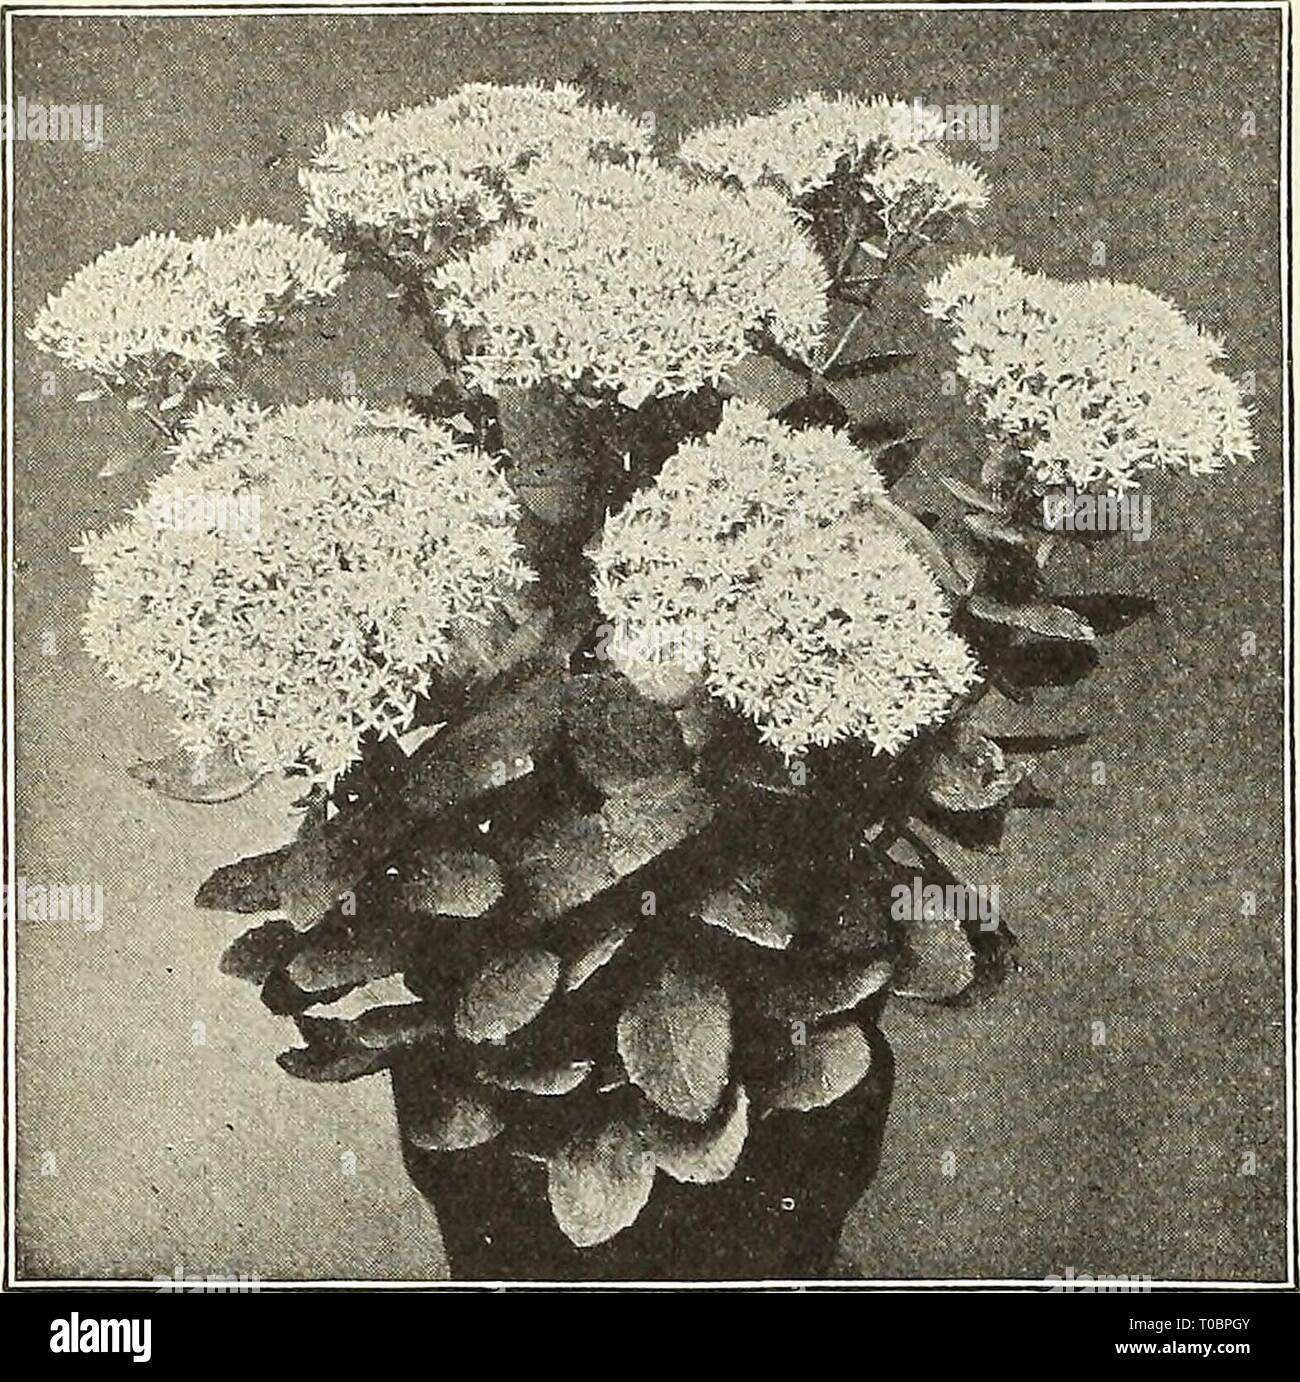 Dreer's garden book 1923 (1923) Dreer's garden book 1923 dreersgardenbook1923henr Year: 1923  194 (flEMyAJREER.^ HARDY PERENNIAL PIANTS &gt;HlLmElJ'Hft    Sedum Spectabile SEDUM (Stone-crop) DWARF VARIETIES Suitable for the rockery, carpet-bedding, covering of graves, etc. Acre {Golden Moss). Much used for covering graves; foliage green; flowers bright yellow. Album. Green foliage, white flowers. Ewersii. Broad glaucous foliage and purplish-pink flowers in summer; 6 inches. Sexangulare. Very dark green foliage; yellow flowers. Stahli. Compact species with crimson-tinted foliage in autumn. Stol Stock Photo